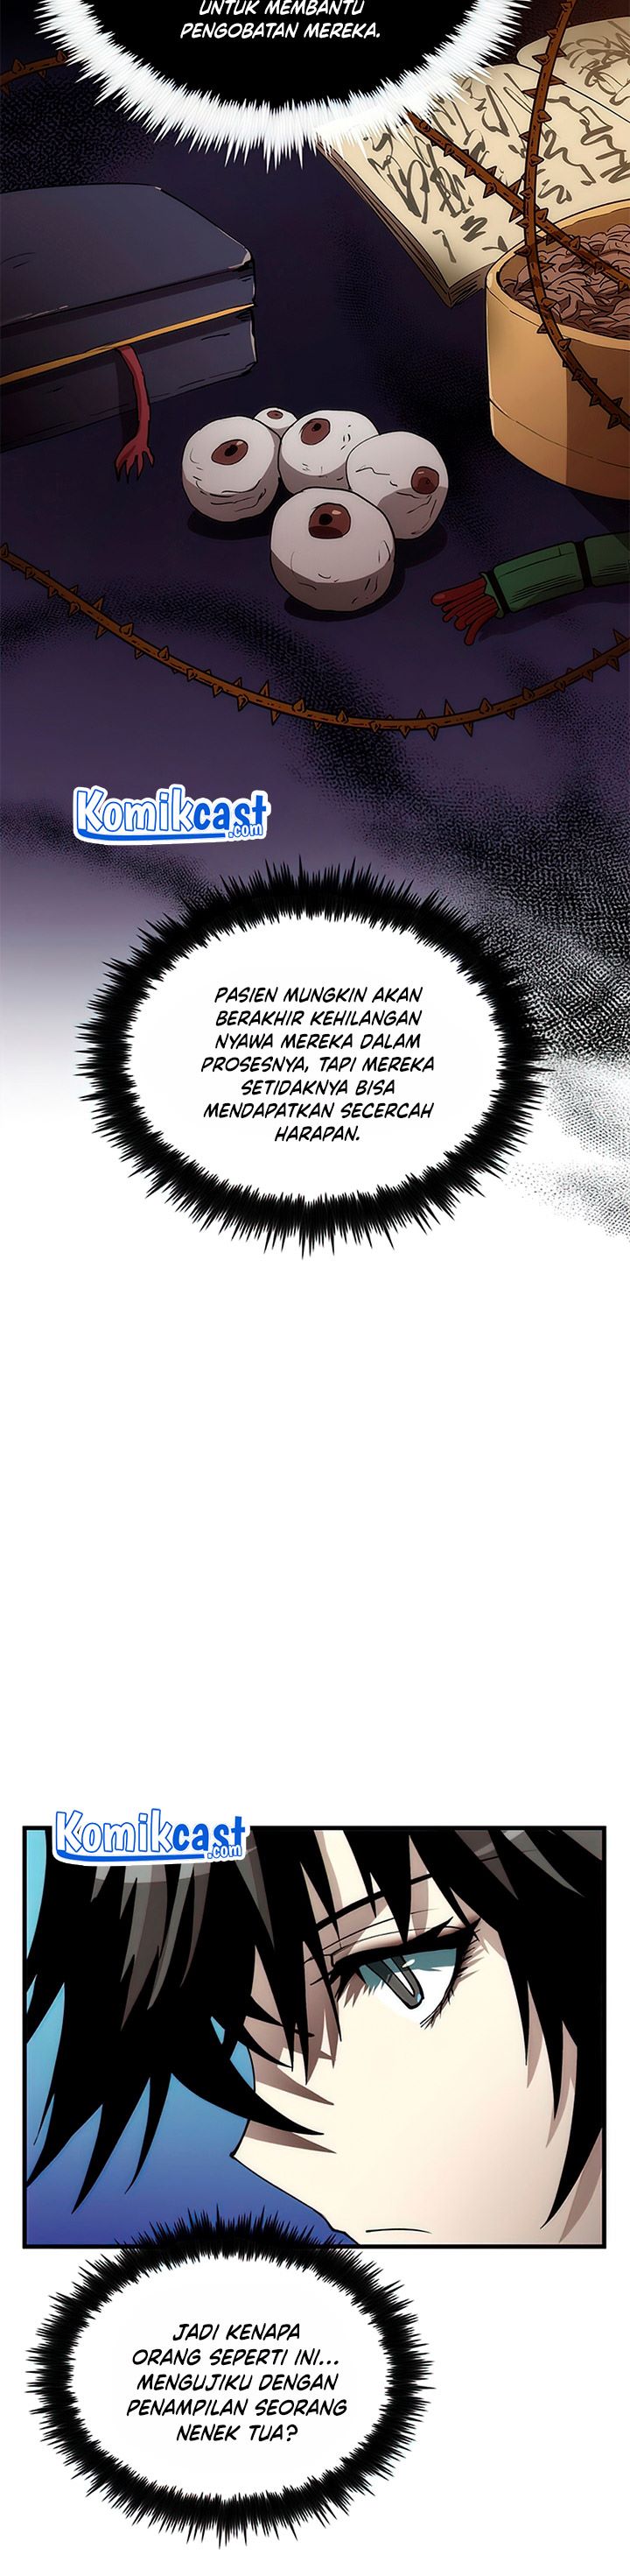 Doctor’s Rebirth Chapter 55